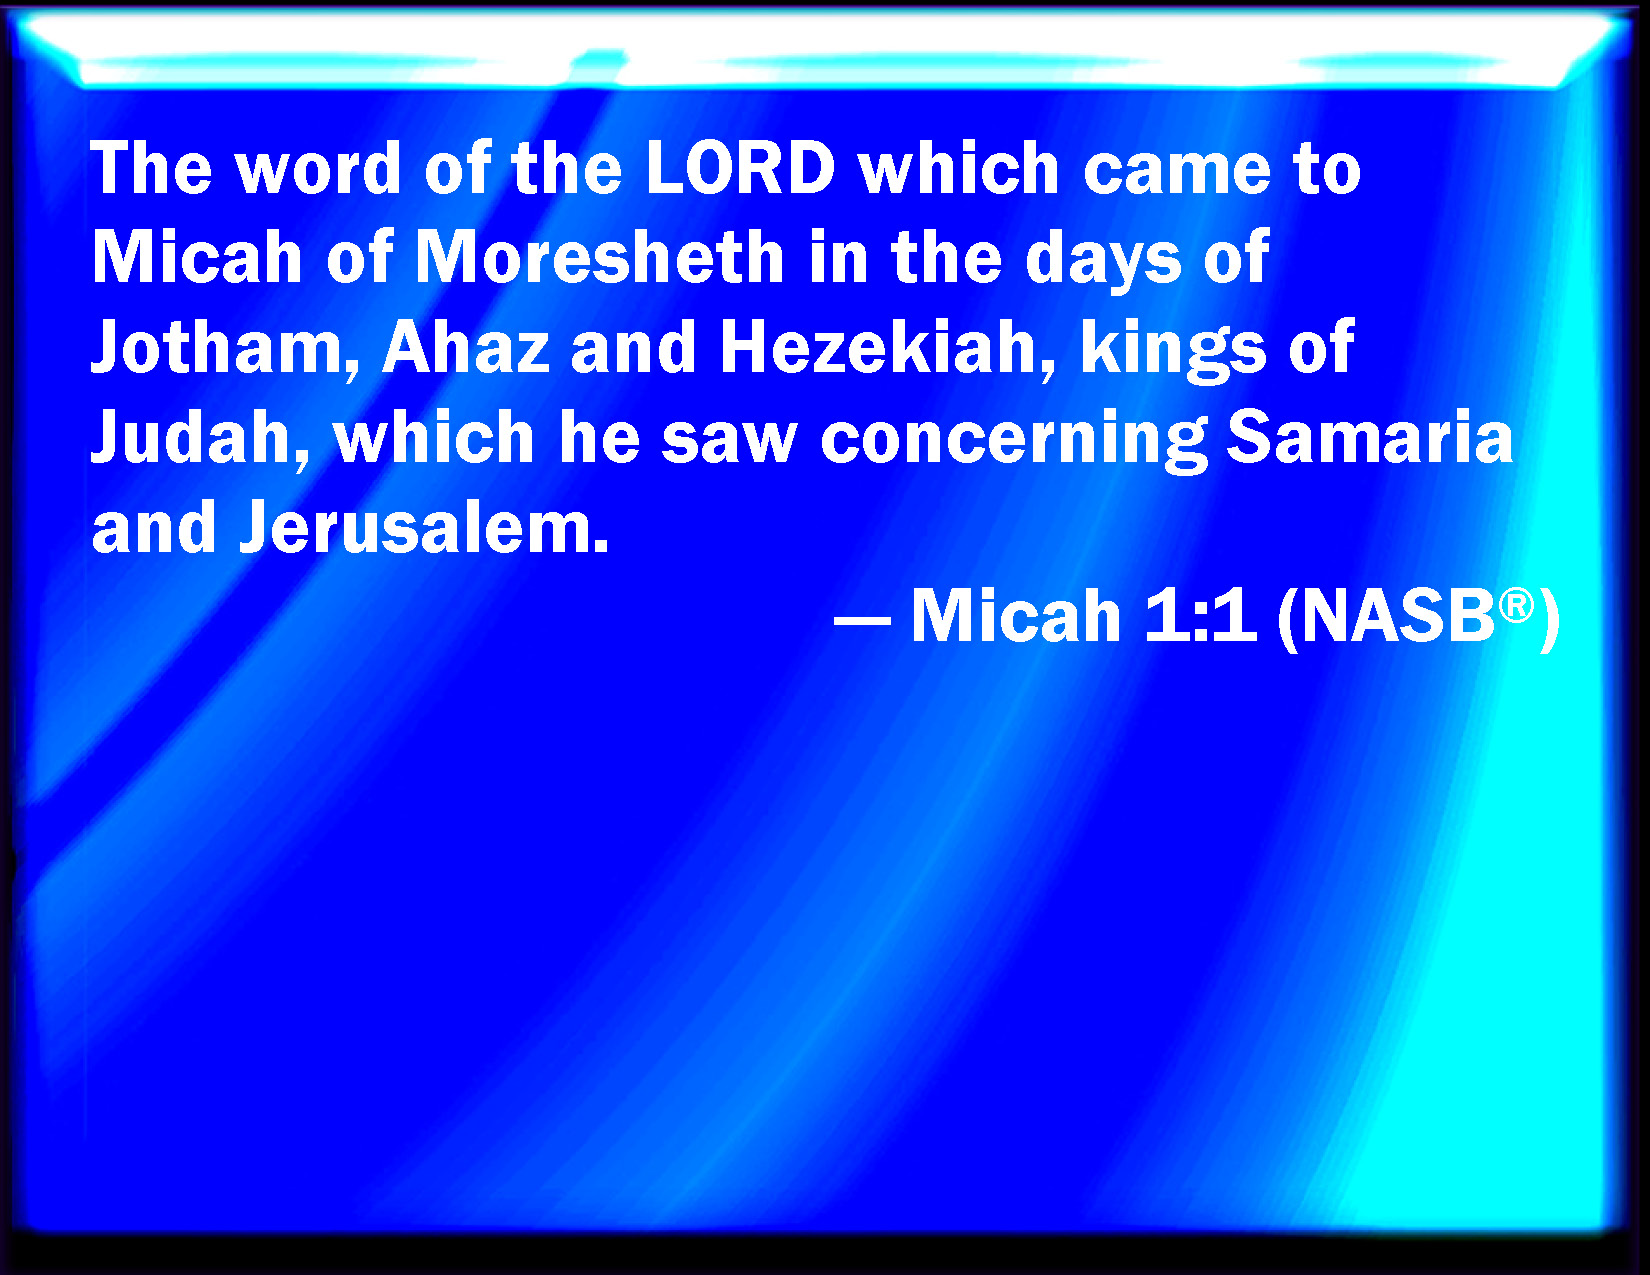 Micah 1 1 The Word Of The Lord That Came To Micah The Morasthite In The